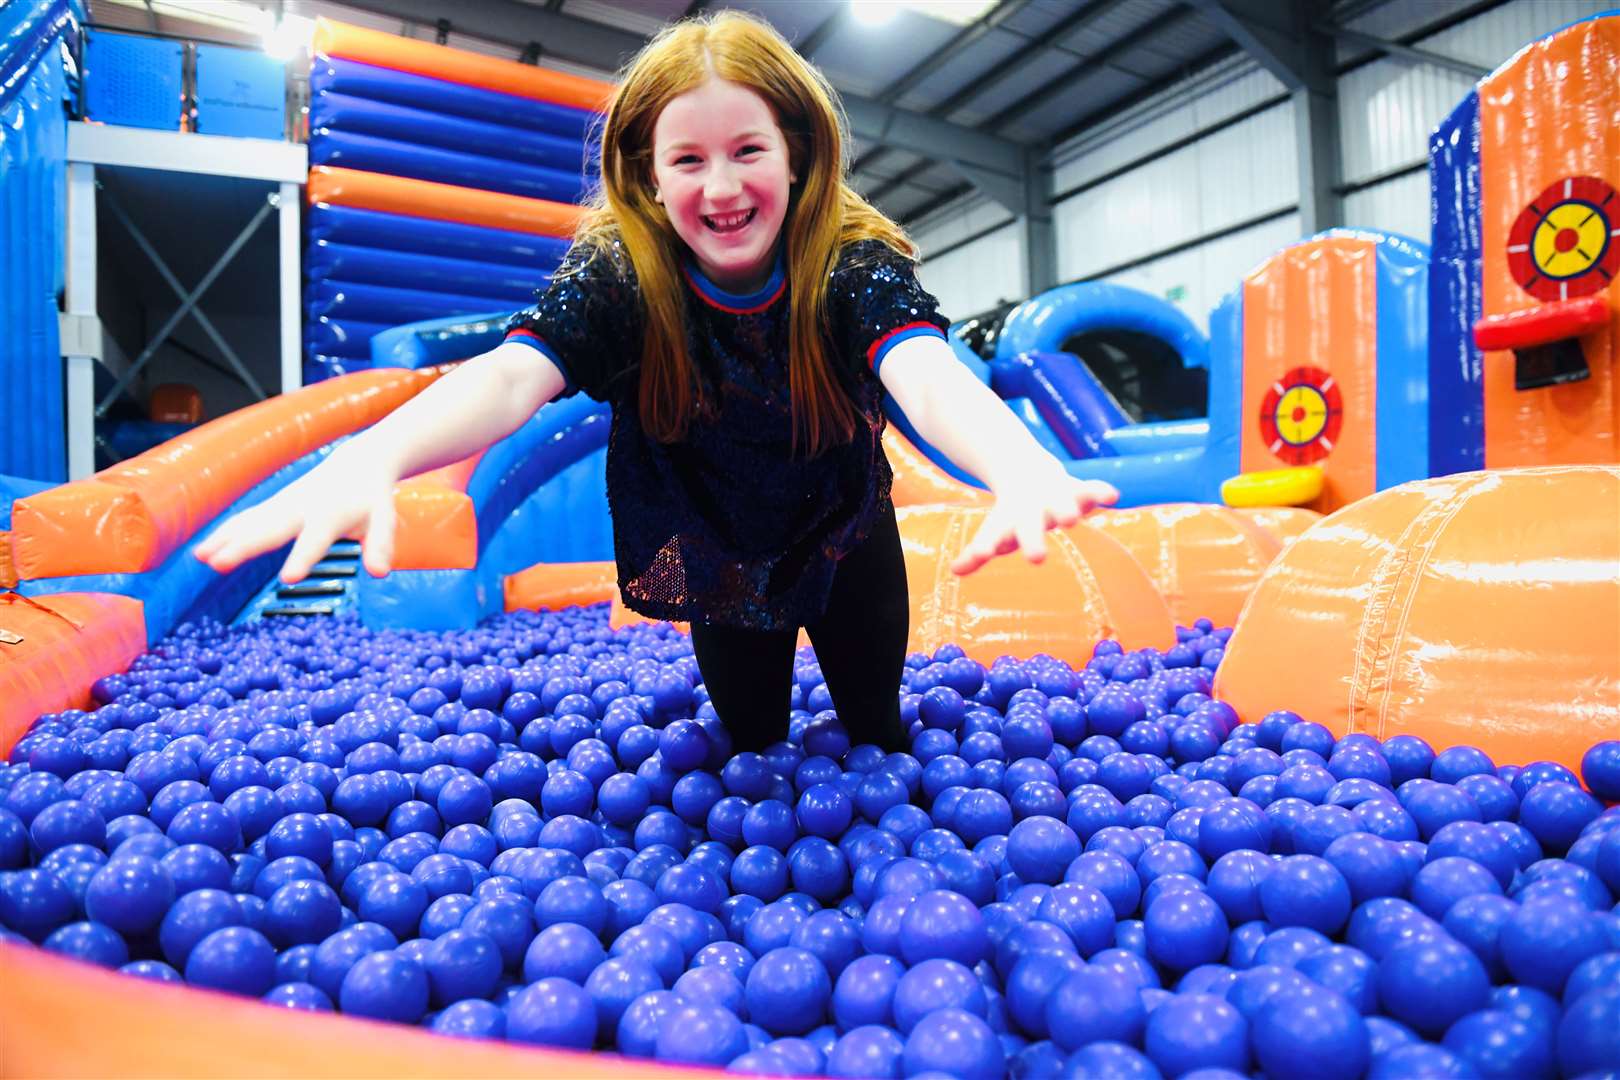 Inflata Nation will feature of 400,000 balls in its ball pit. Picture: Inflata Nation